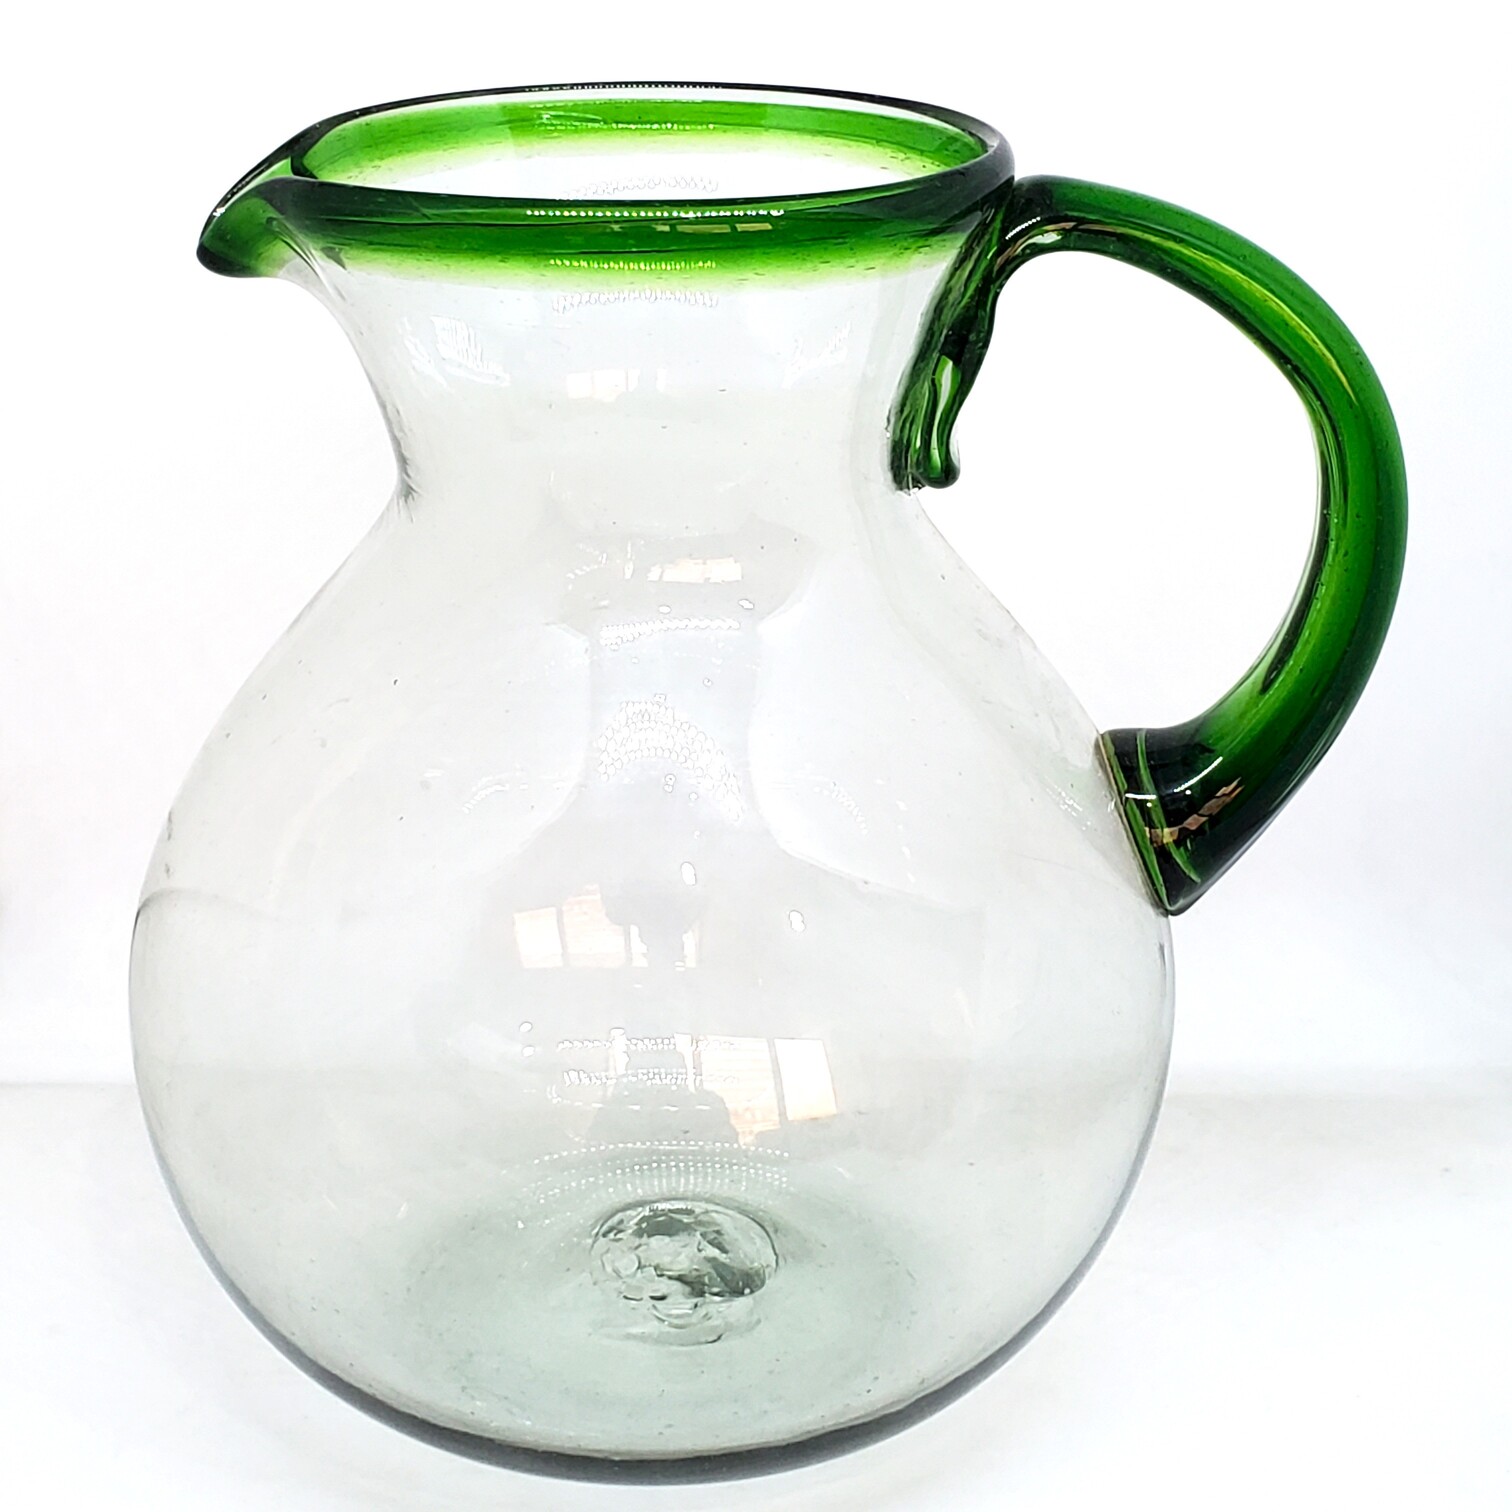 MEXICAN GLASSWARE / Emerald Green Rim 120 oz Large Bola Pitcher / This classic pitcher is perfect for pouring out all kinds of refreshing drinks.